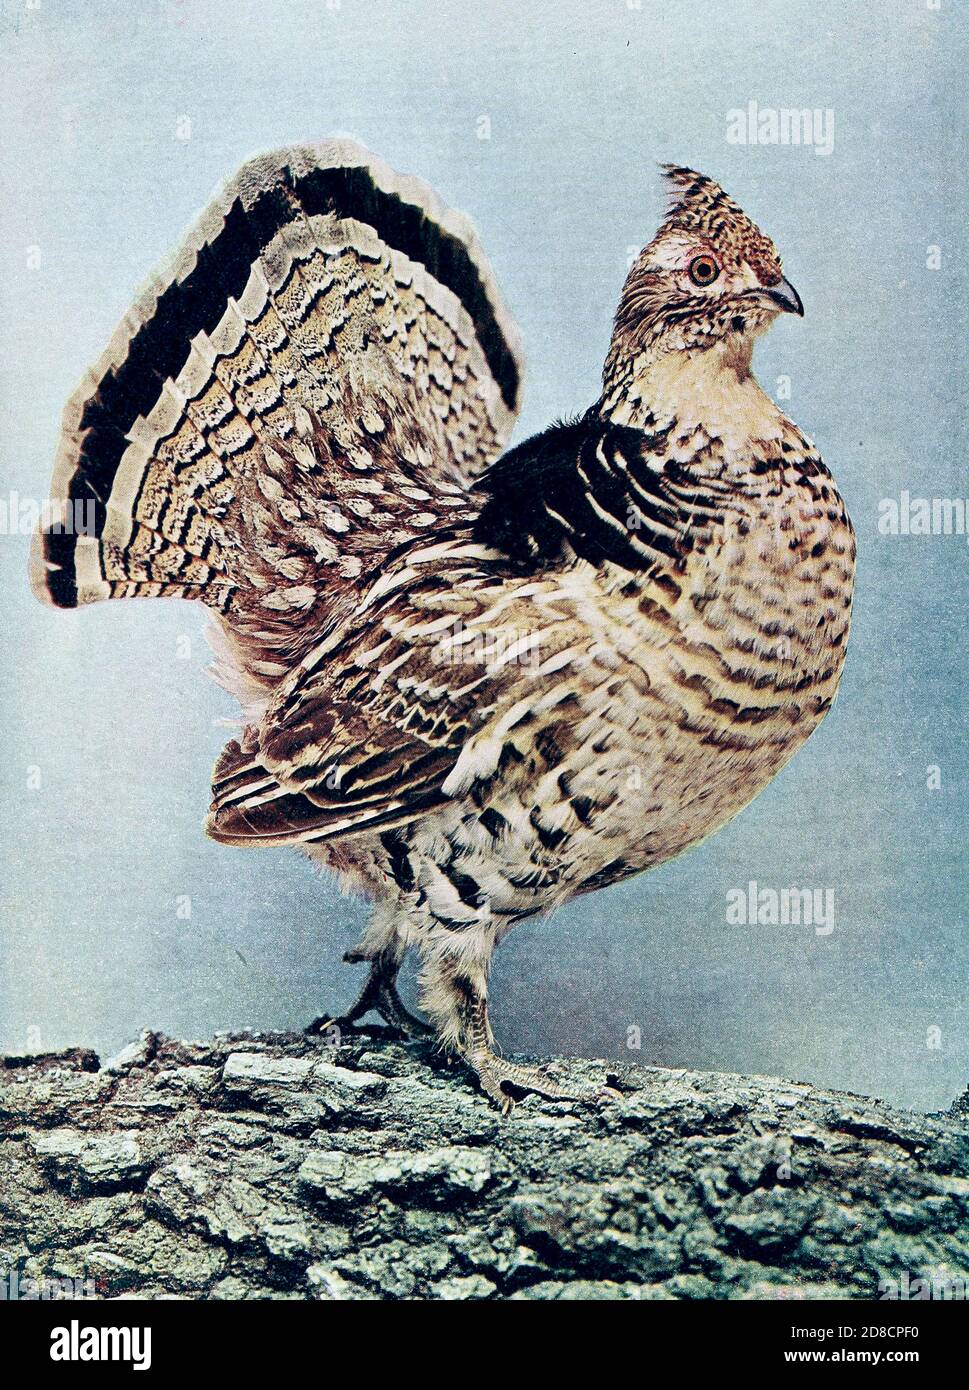 The ruffed grouse (Bonasa umbellus) is a medium-sized grouse occurring in forests from the Appalachian Mountains across Canada to Alaska. It is non-migratory.From Birds : illustrated by color photography : a monthly serial. Knowledge of Bird-life Vol 1 No 1 June 1897 Stock Photo